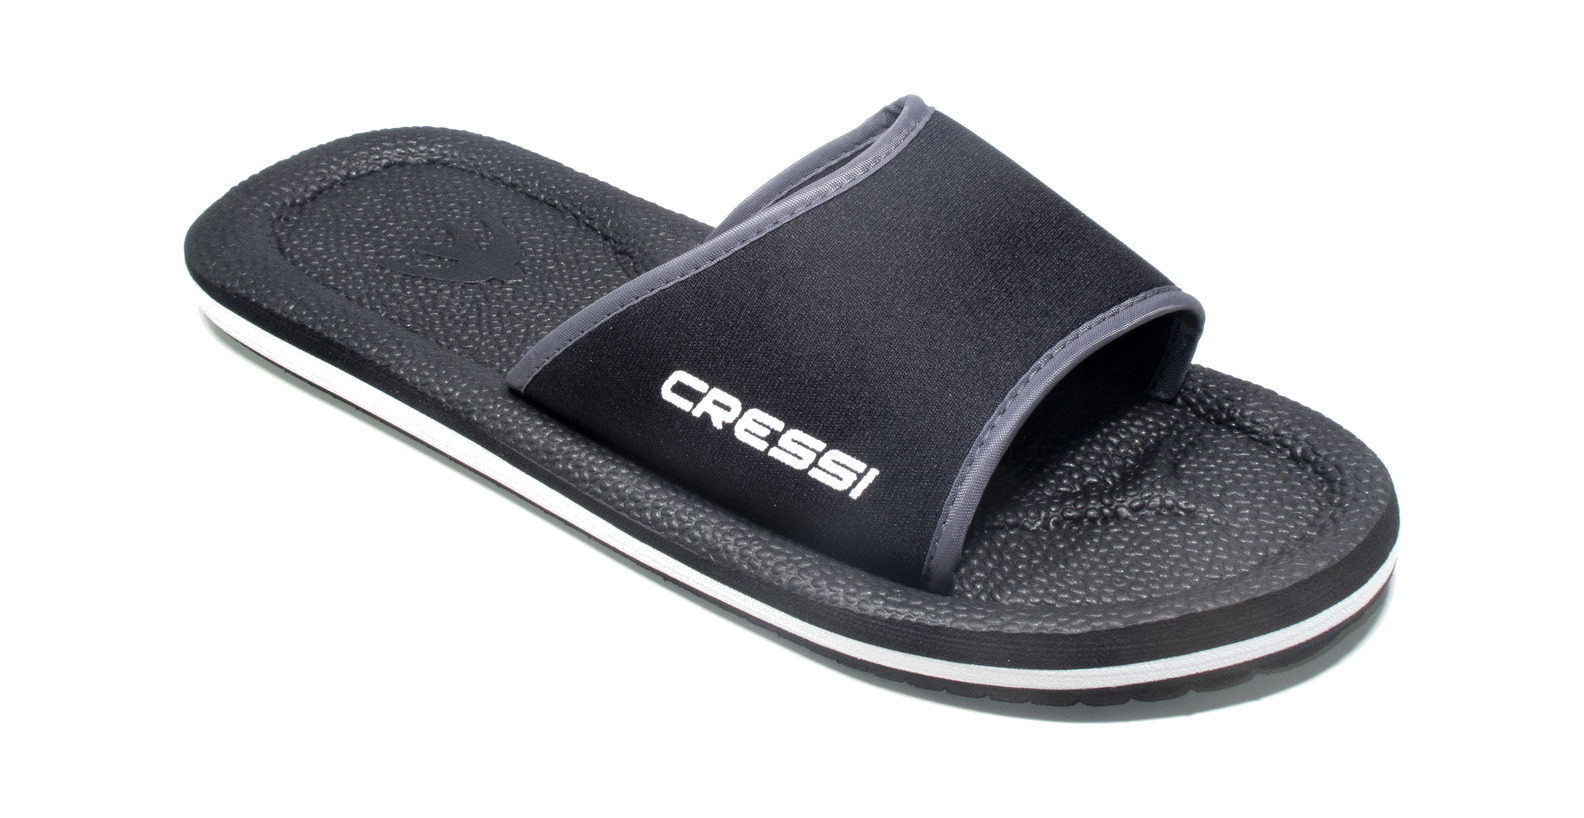 LIPARI flip flops for men and women by CRESSI| Versatile design for pool and bea - Picture 1 of 1